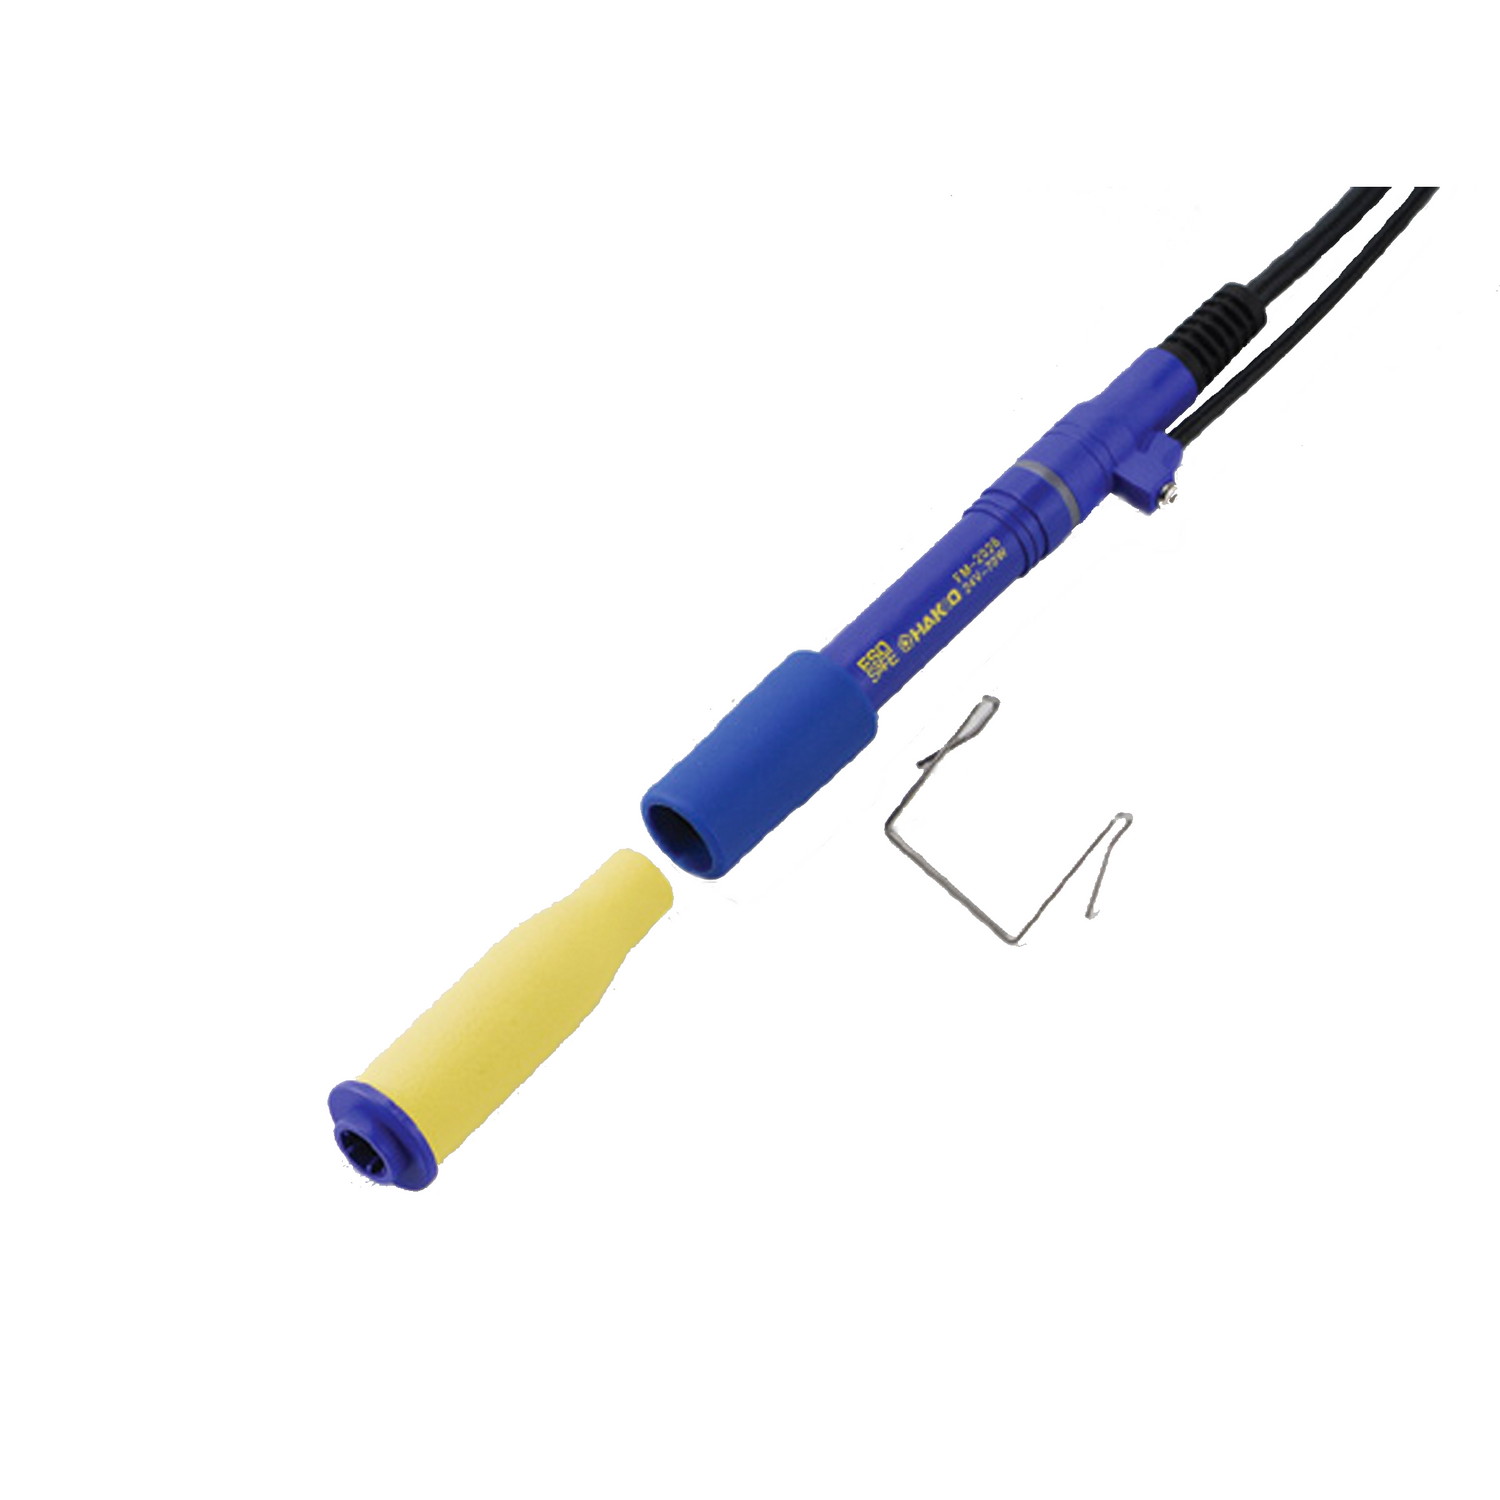 Hakko N2 soldering iron FM2026 handpiece only for soldering printed circuit board for SMT assembly production line